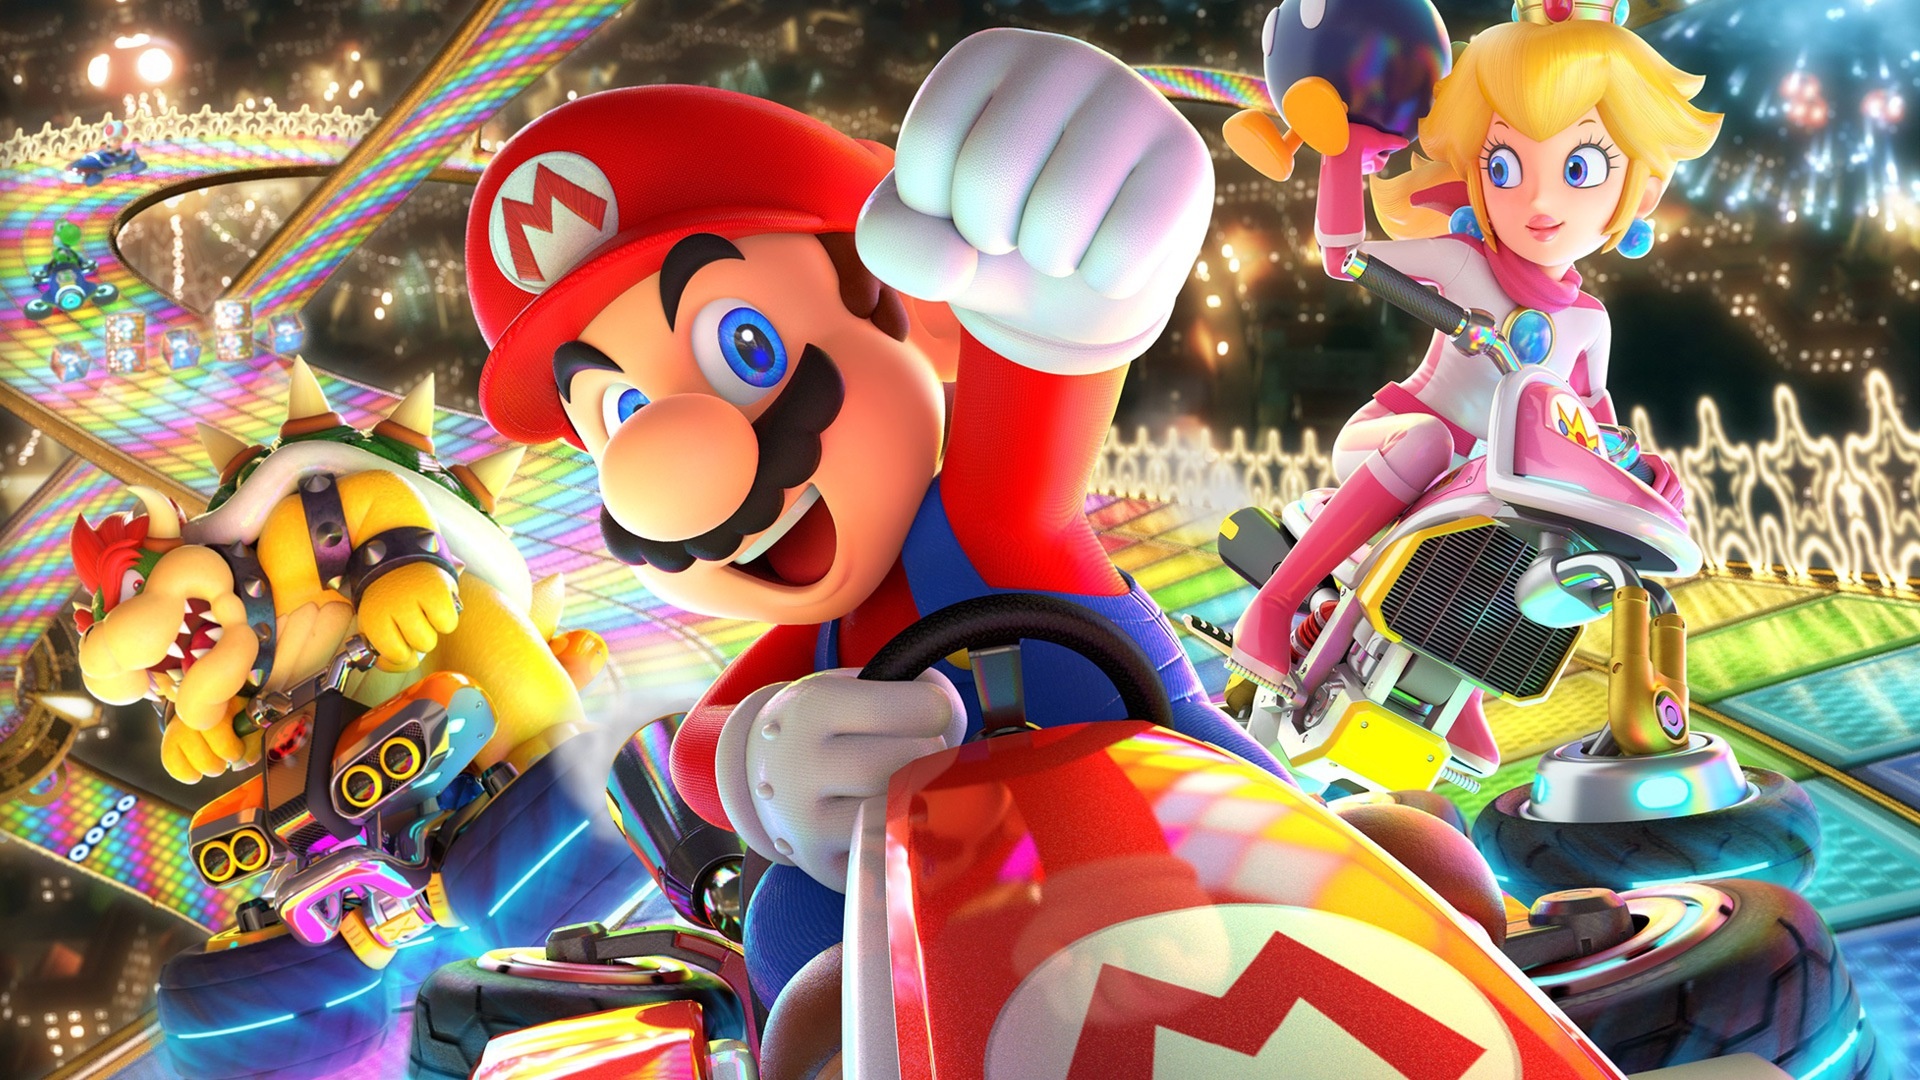 The Mario Kart 8 – Wave 4 update reveals: You can still look forward to many new characters